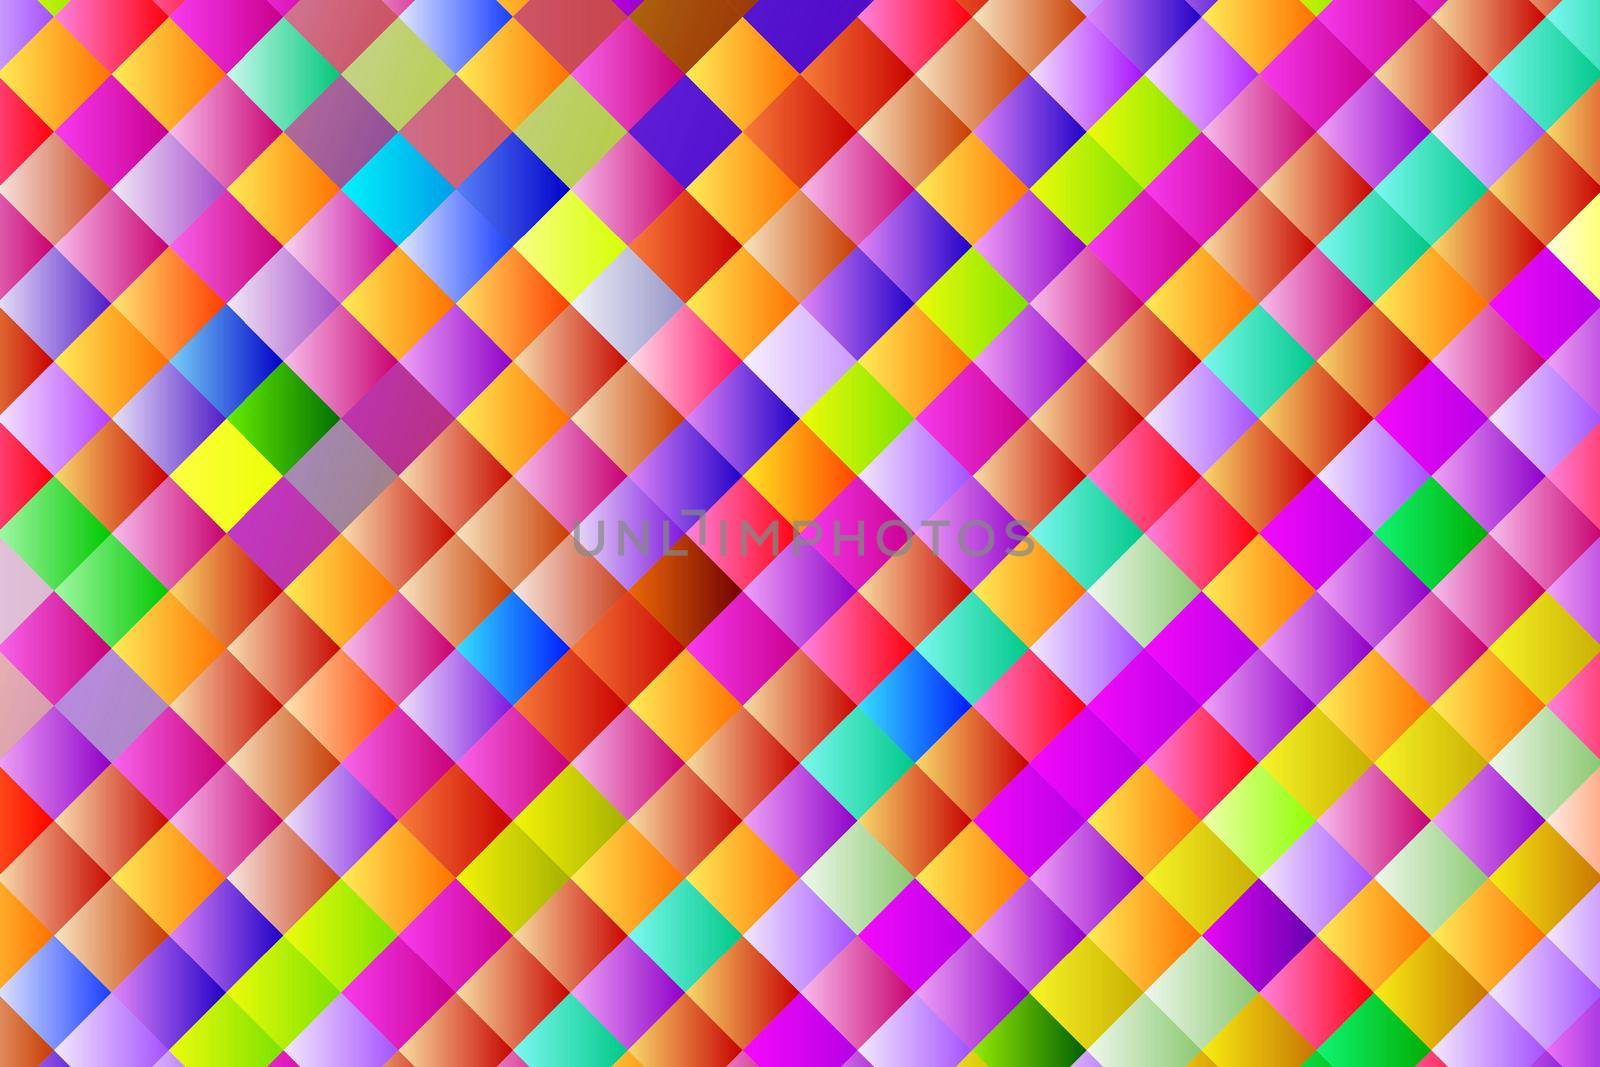 Geometric colorful background. Abstract squared pattern, colorf elements. Vector design for banners, flyers, business cards, invitations, wallpaper cover. Modern business or technology presentation.